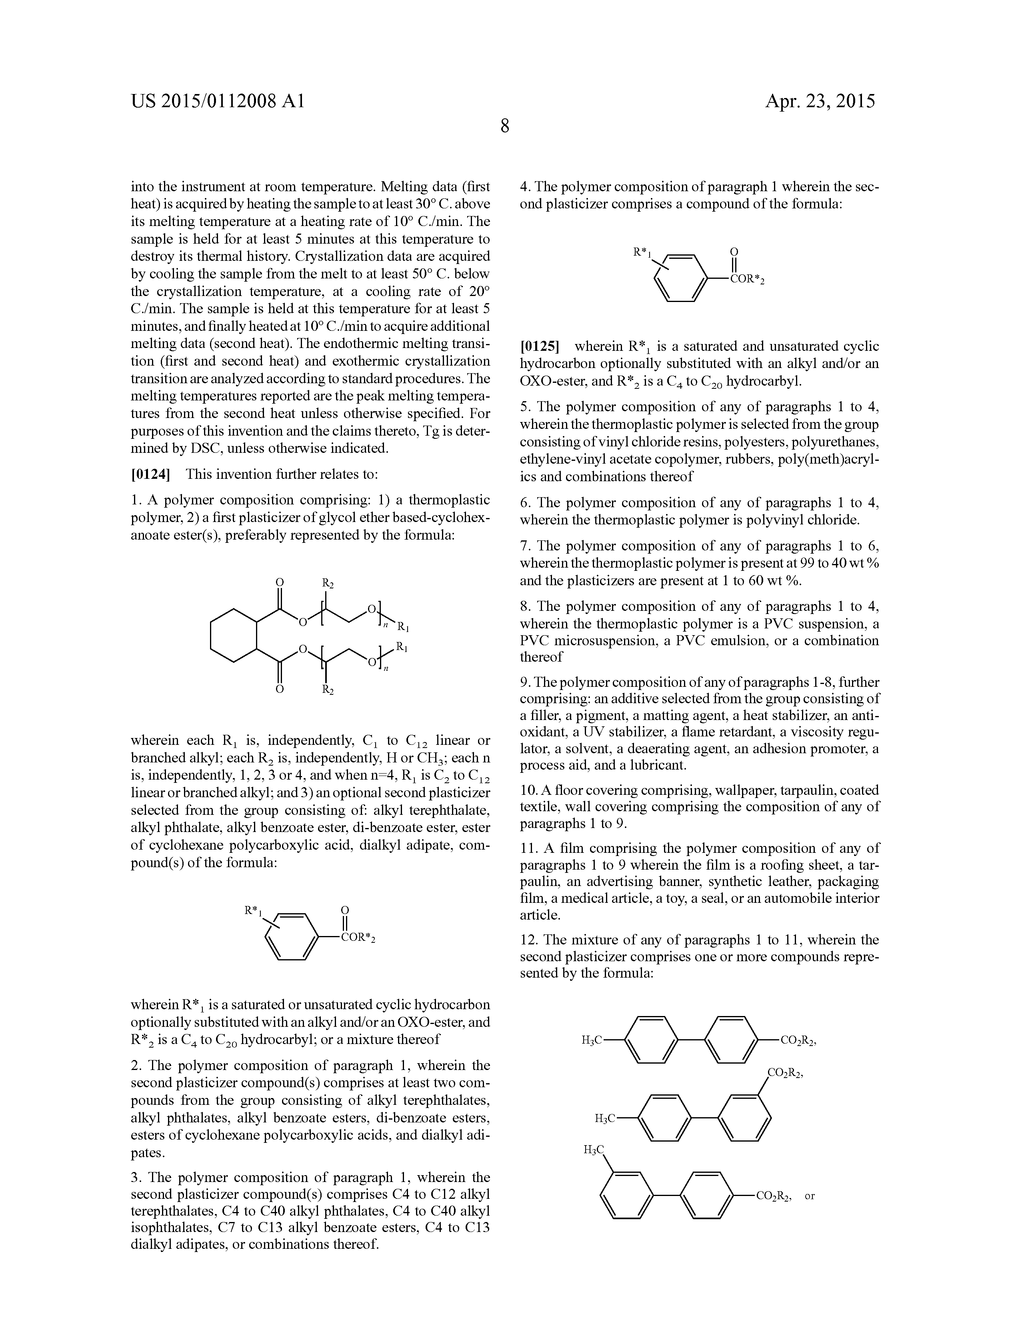 Glycol Ether-Based Cyclohexanoate Ester Plasticizers and Blends Therefrom - diagram, schematic, and image 11